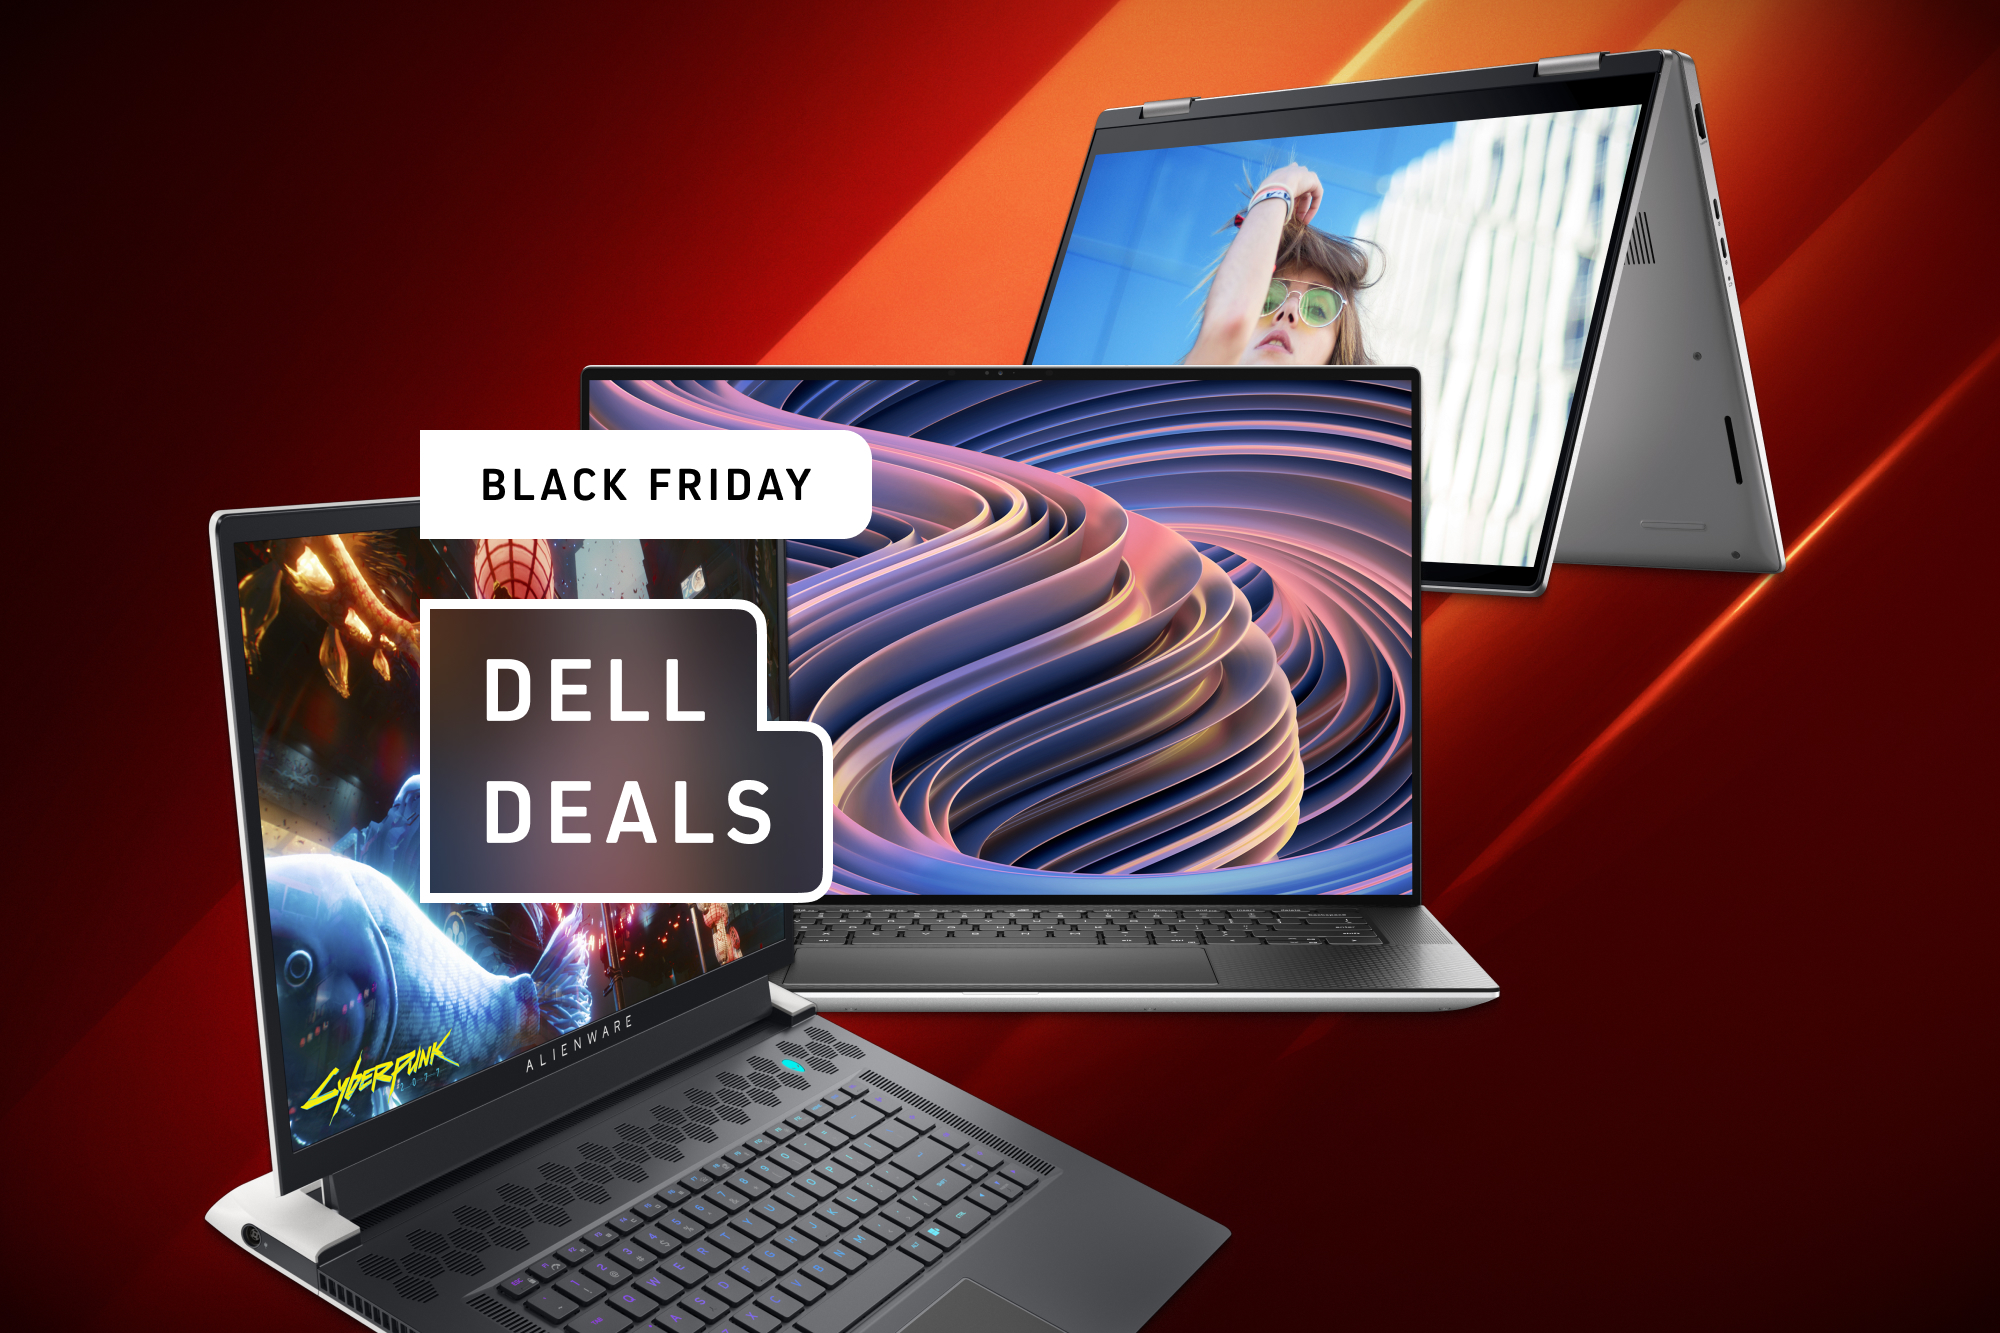 Dell Black Friday Deals: Save on XPS 13, Alienware gaming PCs, and more |  Digital TrendsBack ButtonFilter Button